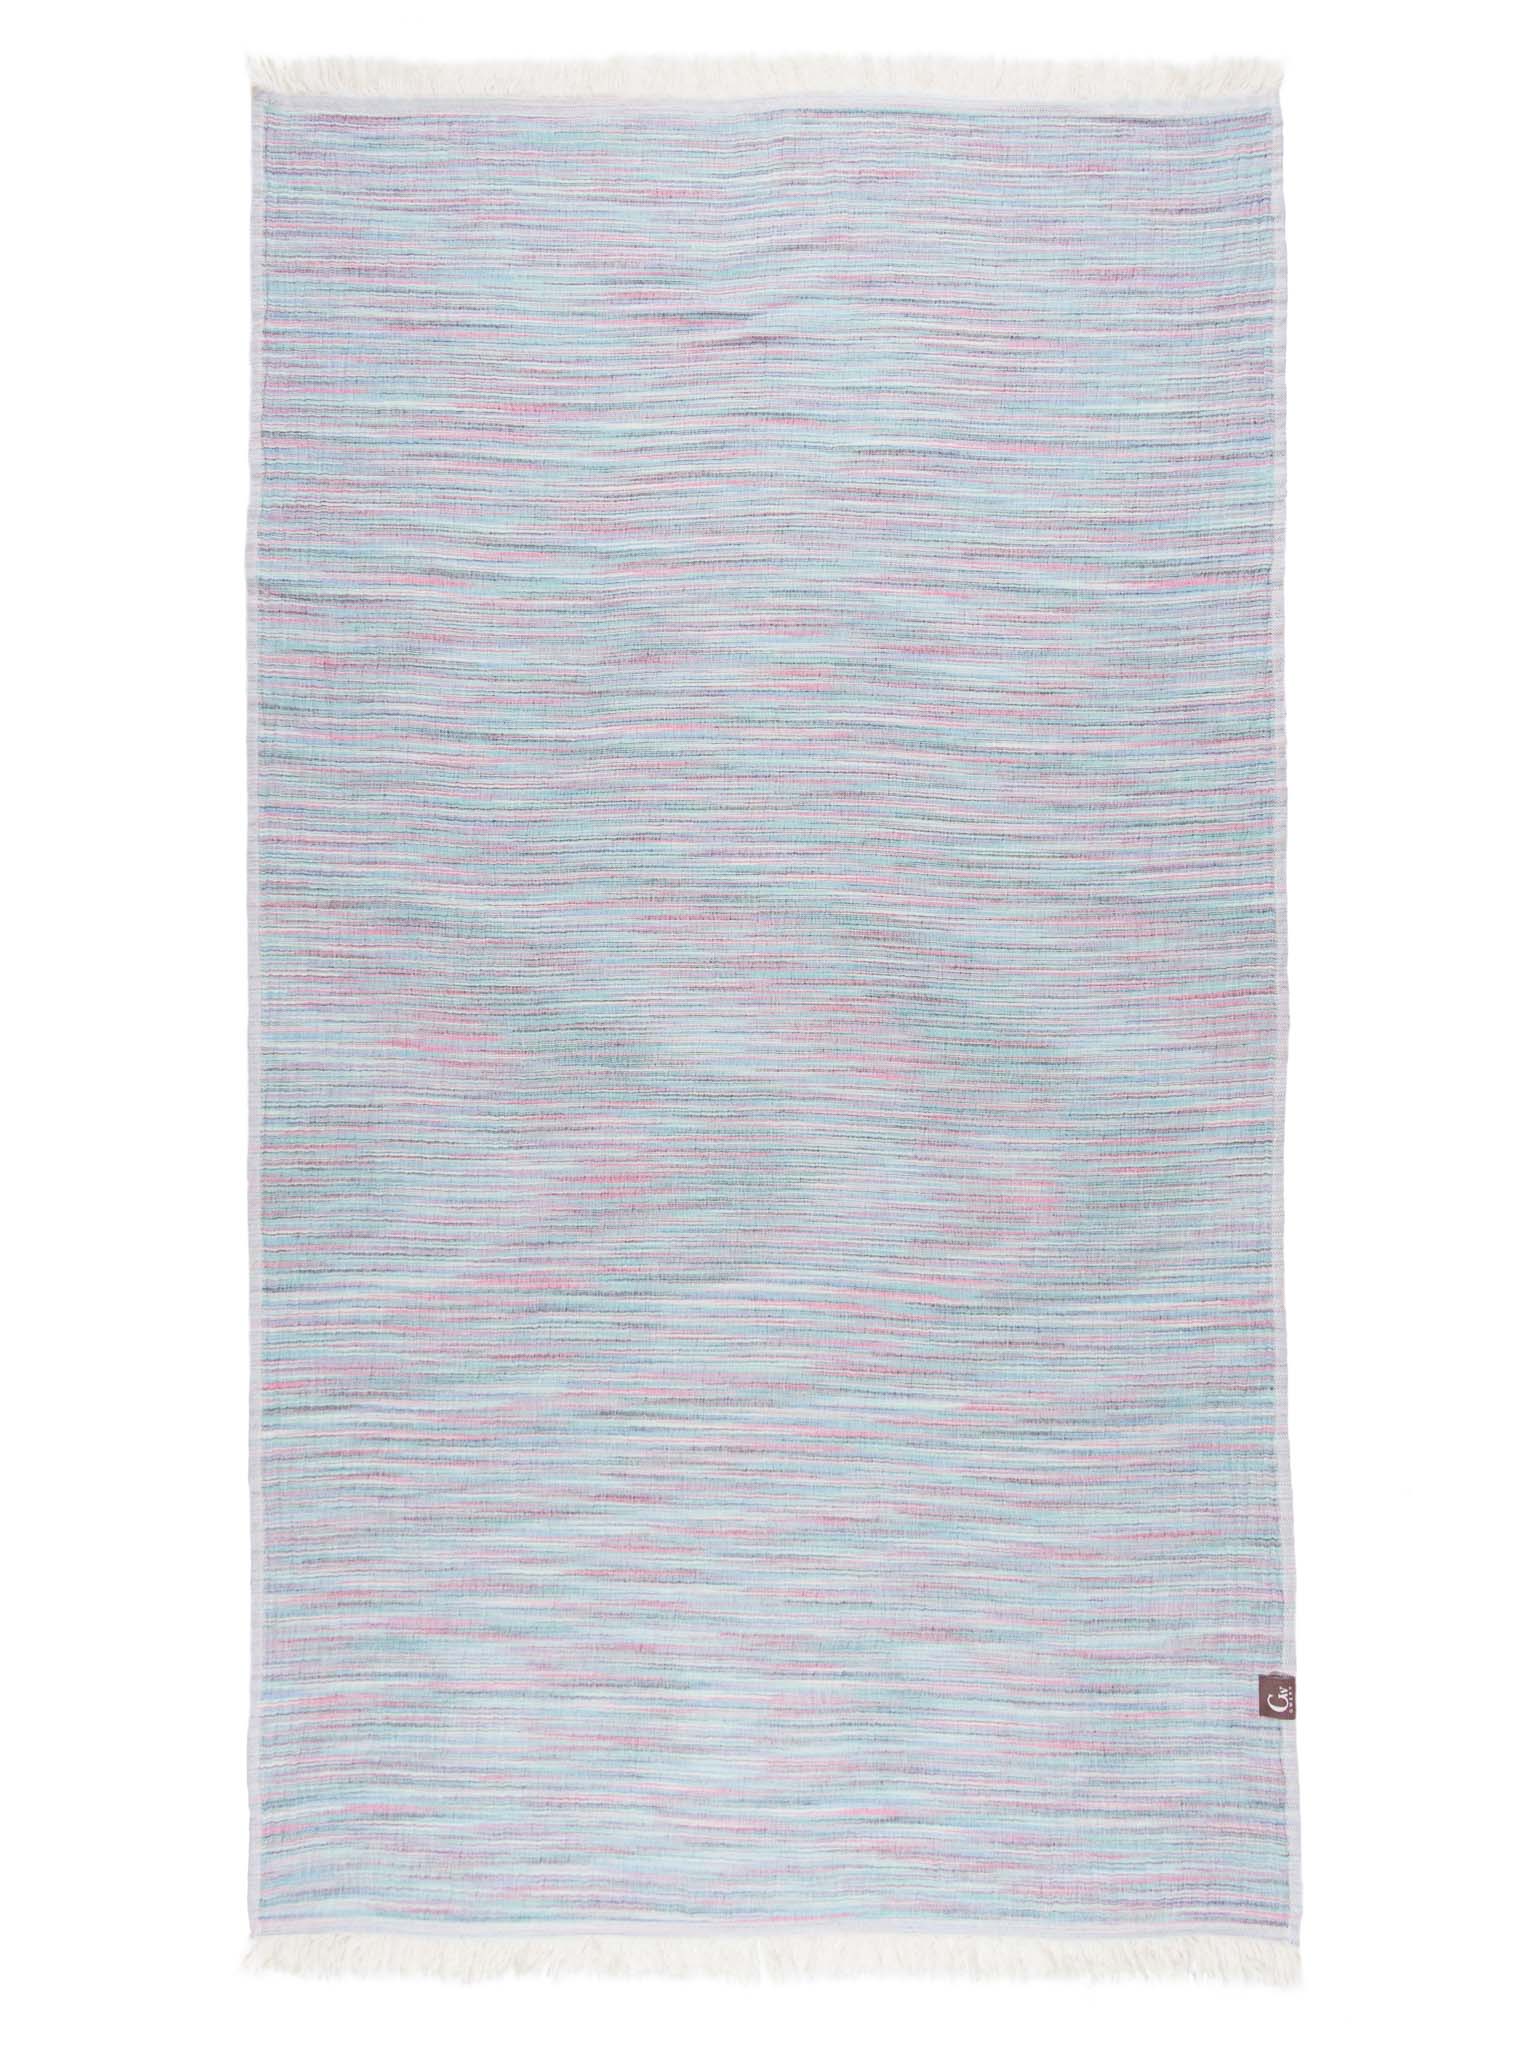 Purple patterned, double sided, beach towel open up